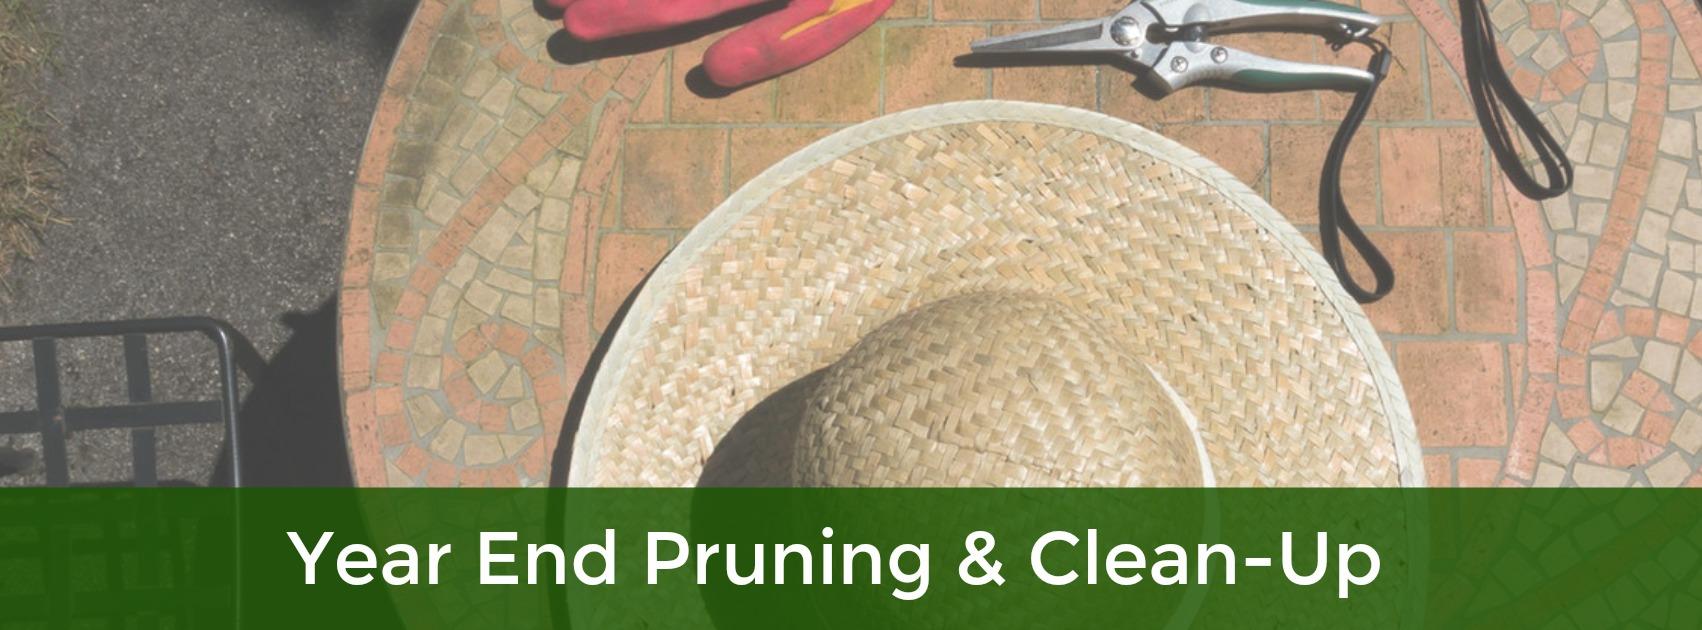 Year End Clean-Up & Pruning Guidelines